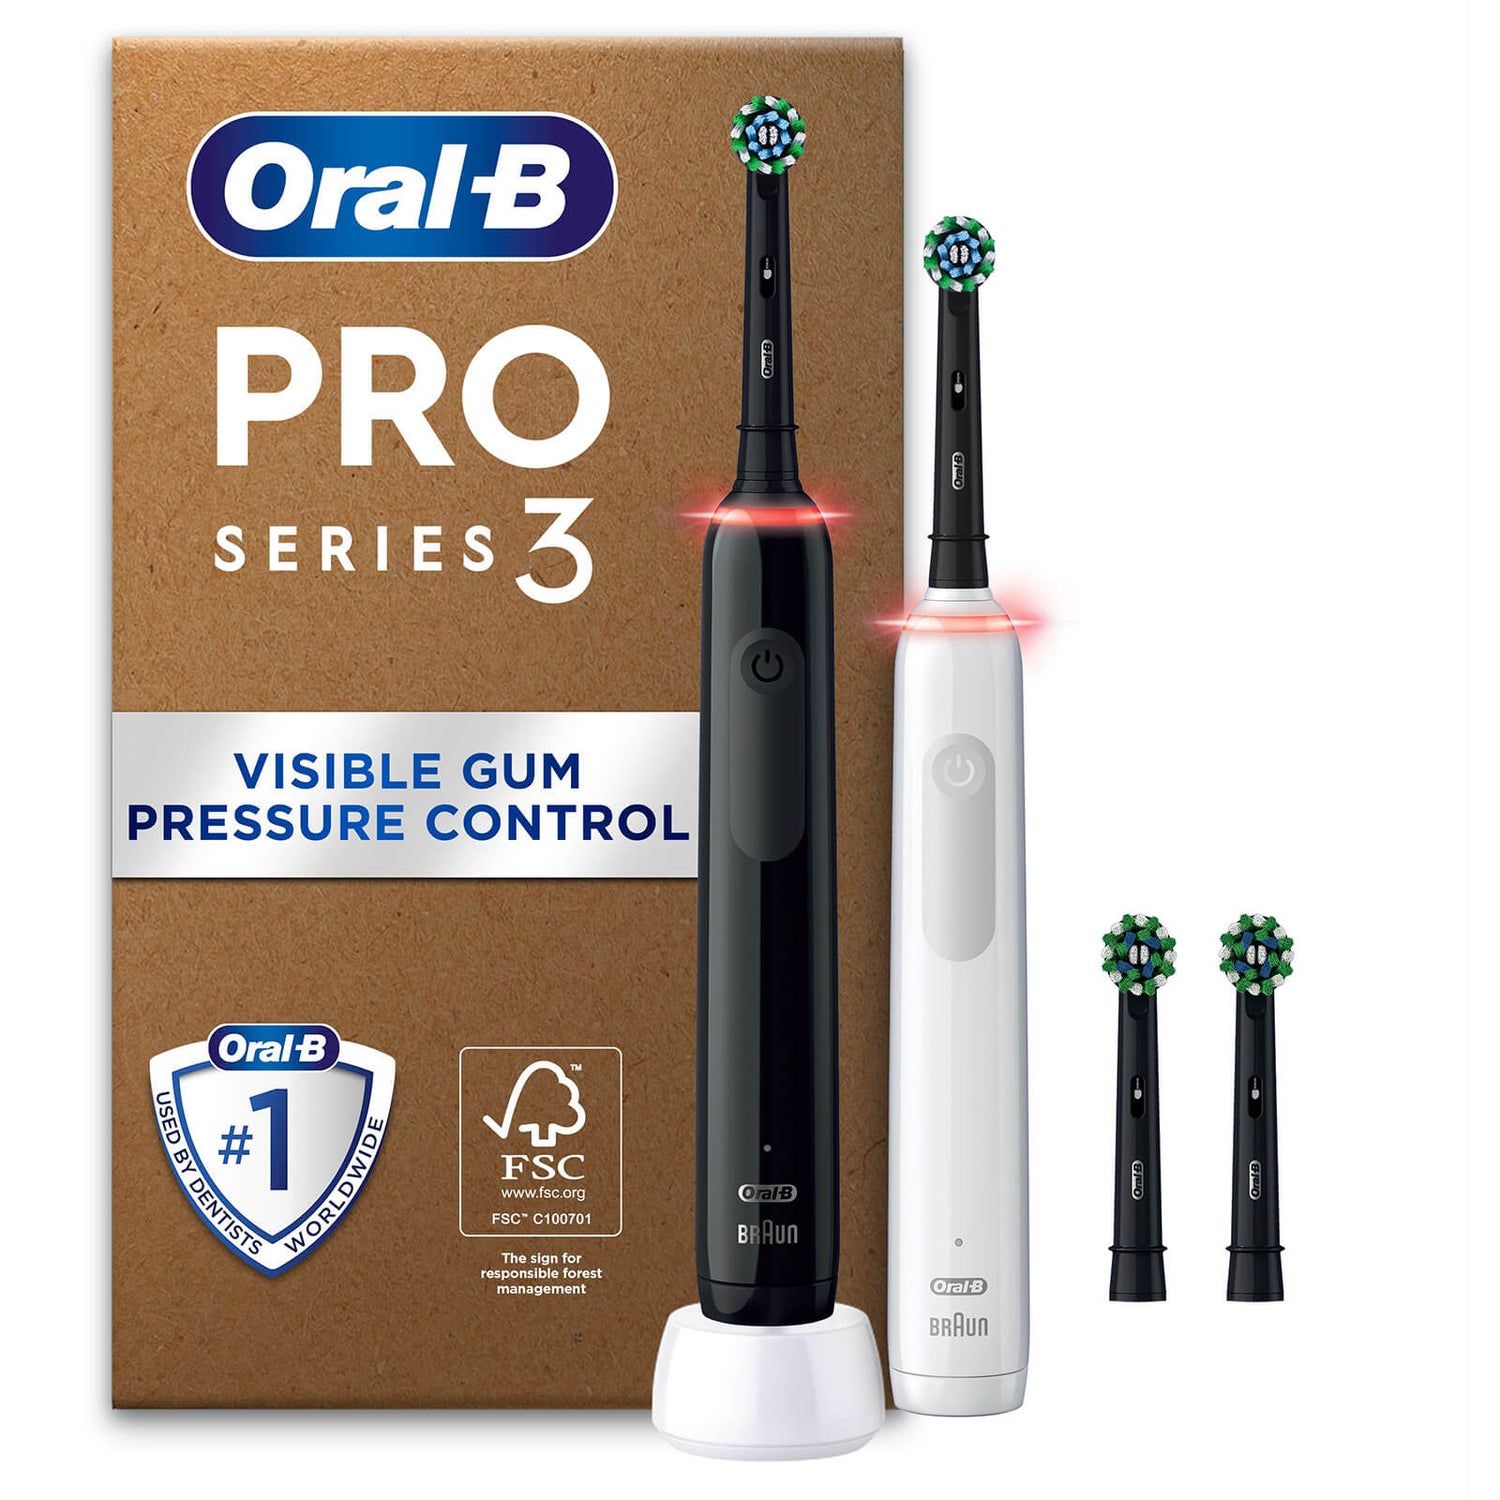 Oral B Pro 3 3900 Duo Pack - Black & White and Extra Pack of Toothbrush Head 2 Count